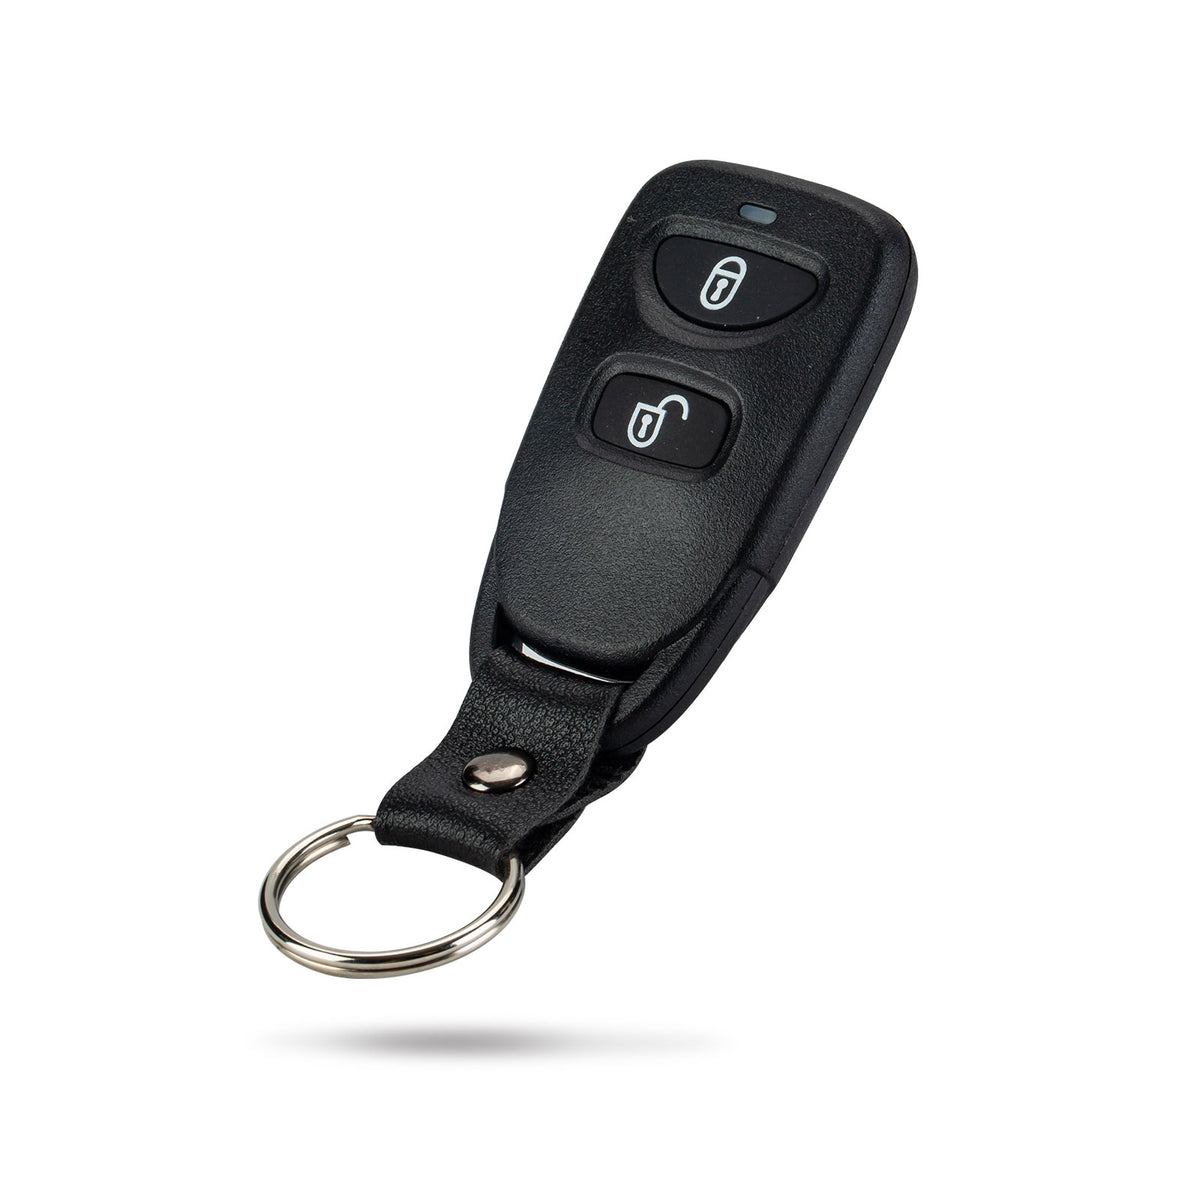 Extra-Partss Remote Car Key Fob Replacement for Hyundai PLNHM-T002 fits 2006 2007 2008 2009 2010 2011 Accent